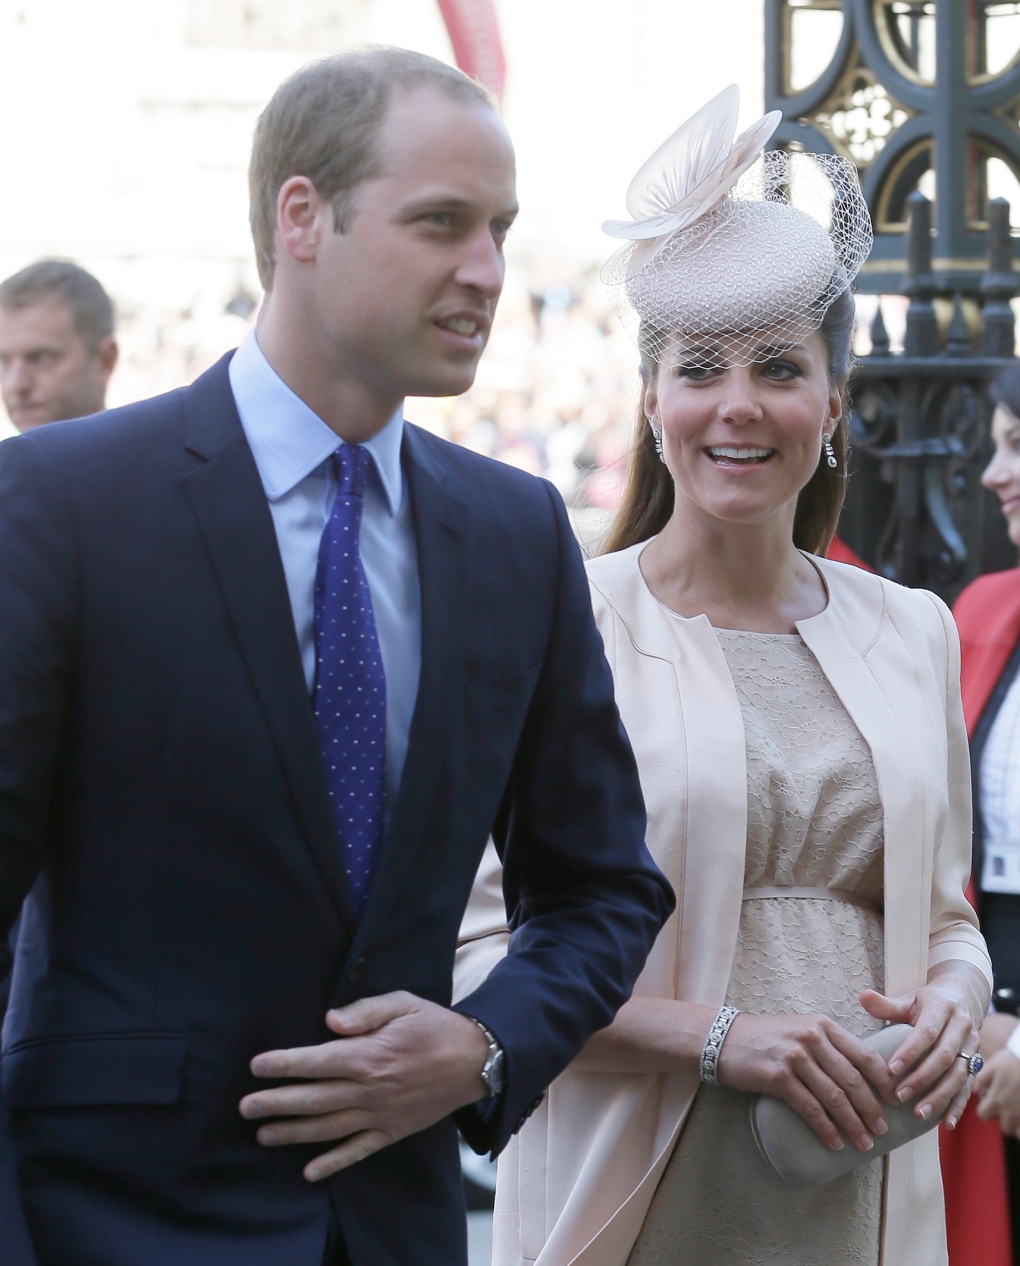 Royals Attend Queen's Coronation Service | CTV News